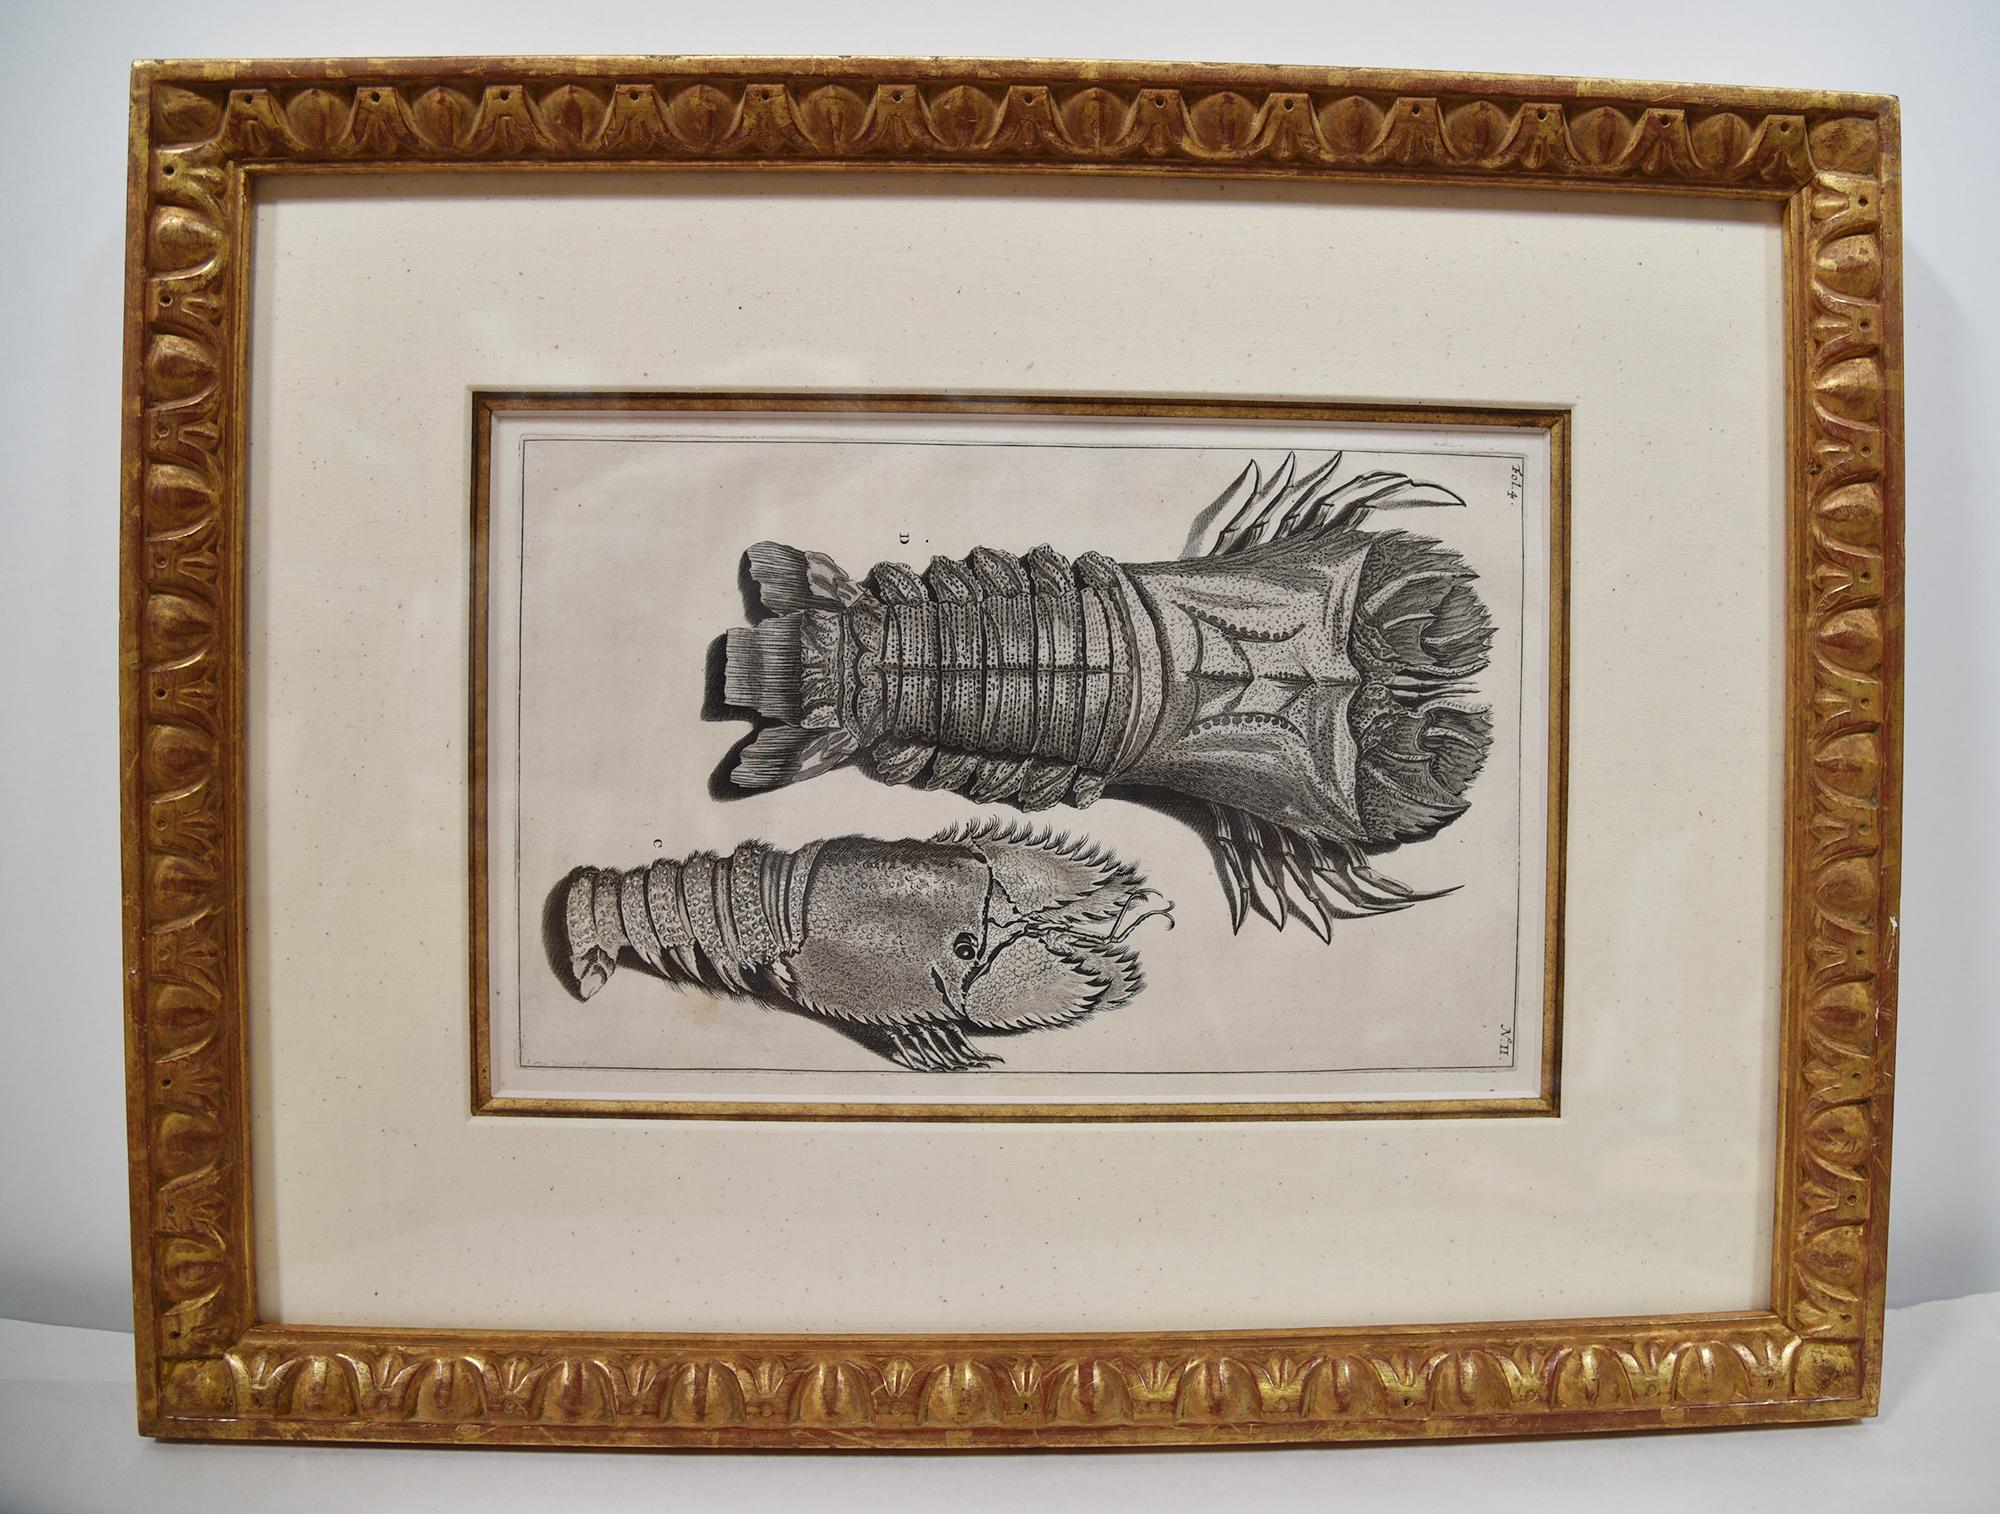 Six exquisitely framed sea life prints engraved by Maria Sybilla Merian from G.E. Rumphius, Amsterdam, circa 1800. A unique set of seven beautifully etched and engraved pieces that work well in a group placement setting. These pieces are almost